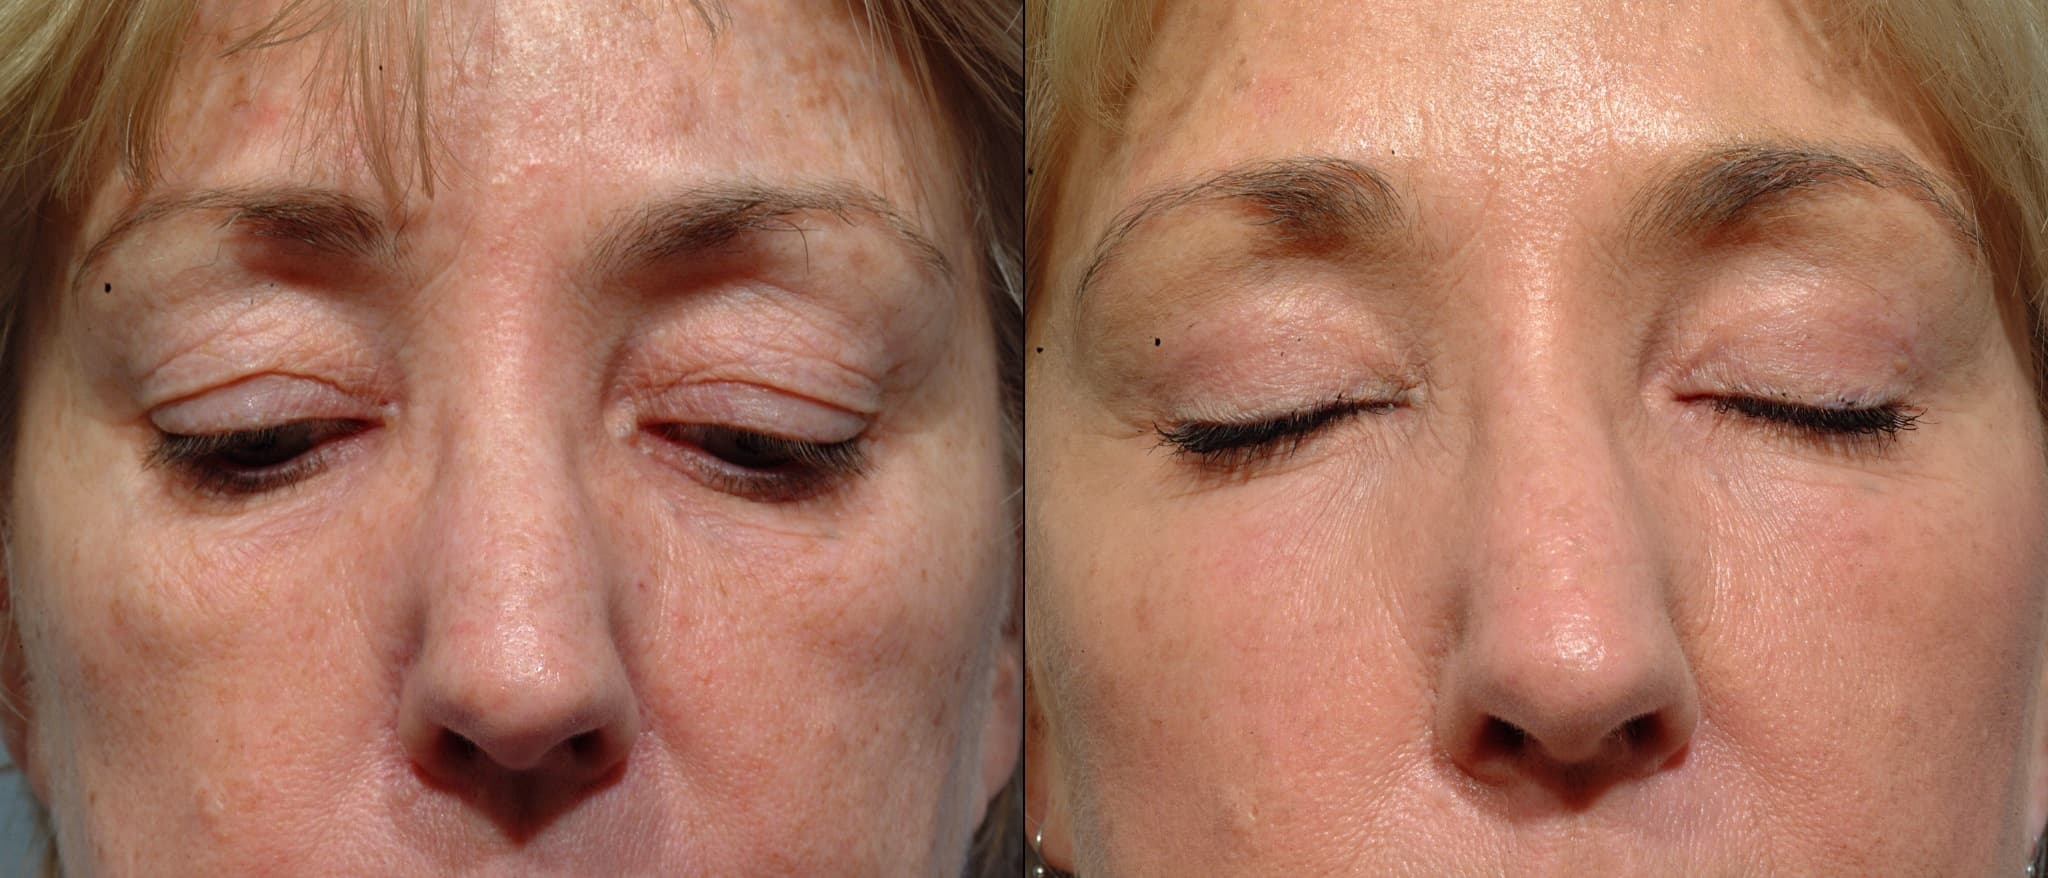 Lower Eyelid Plastic Surgery Before After 1